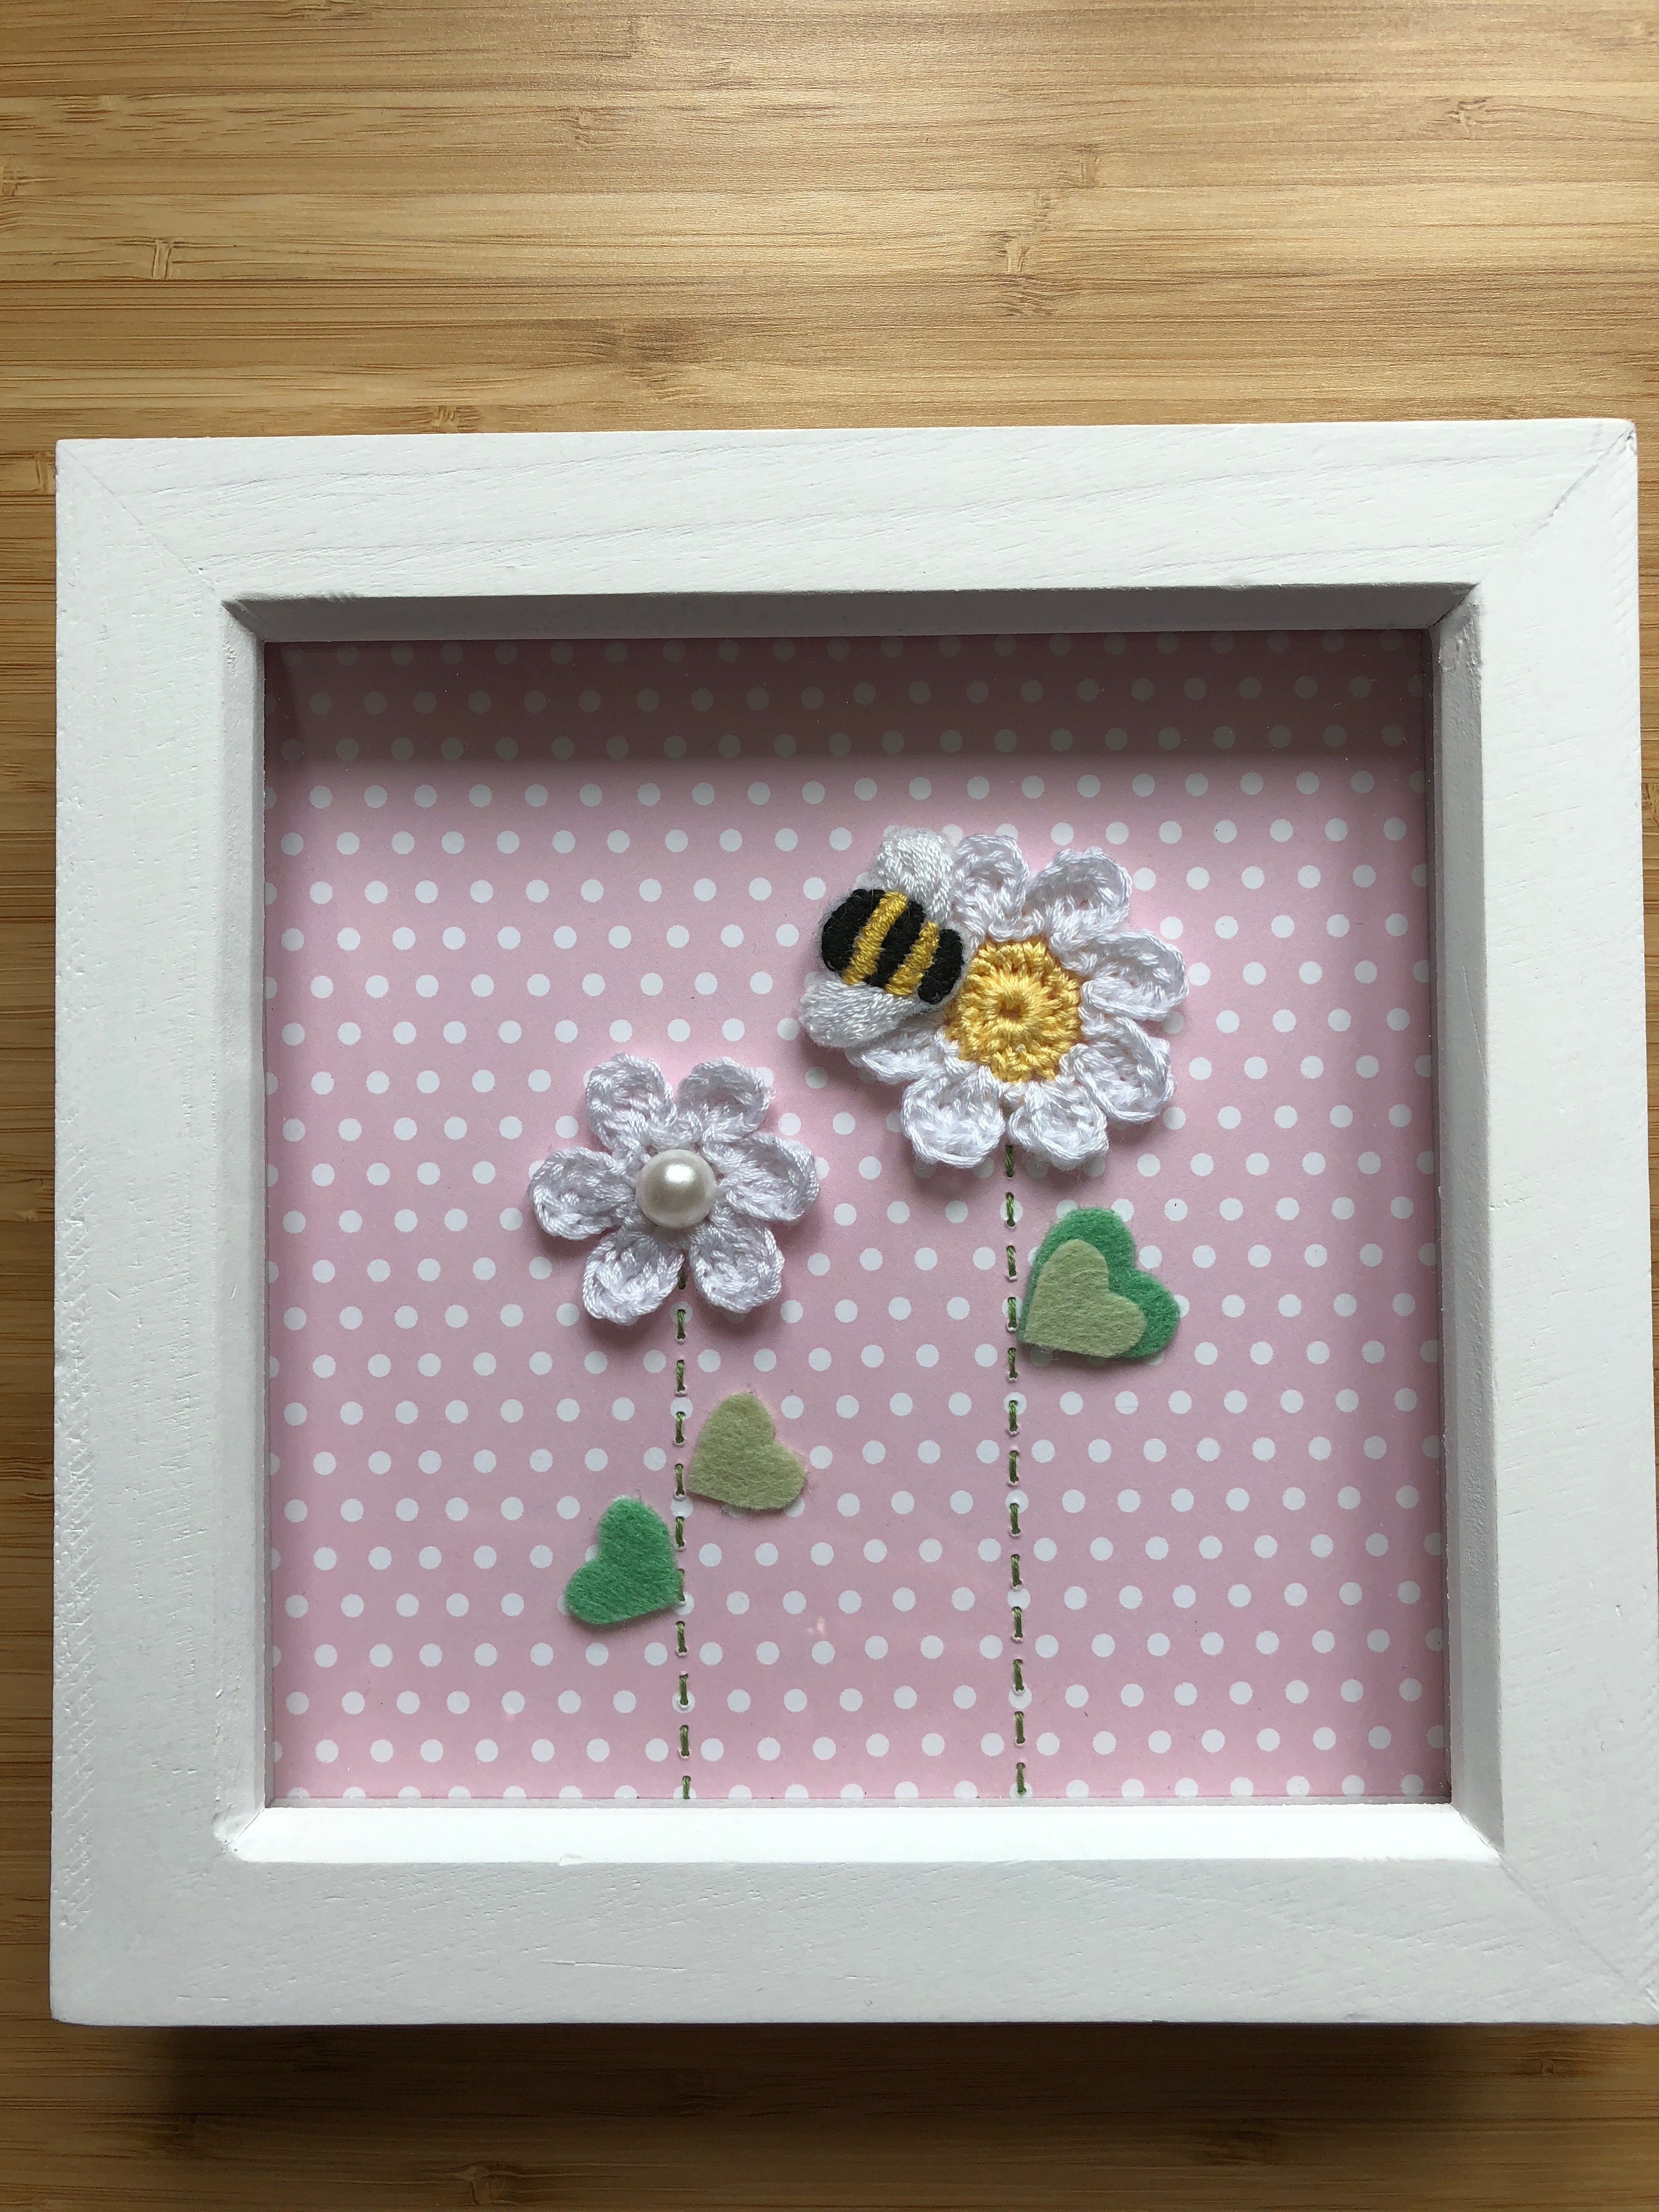 Hand crocheted white daisy flowers and hand embroidered bumblebee picture on pink polkadot background in a white wooden frame.